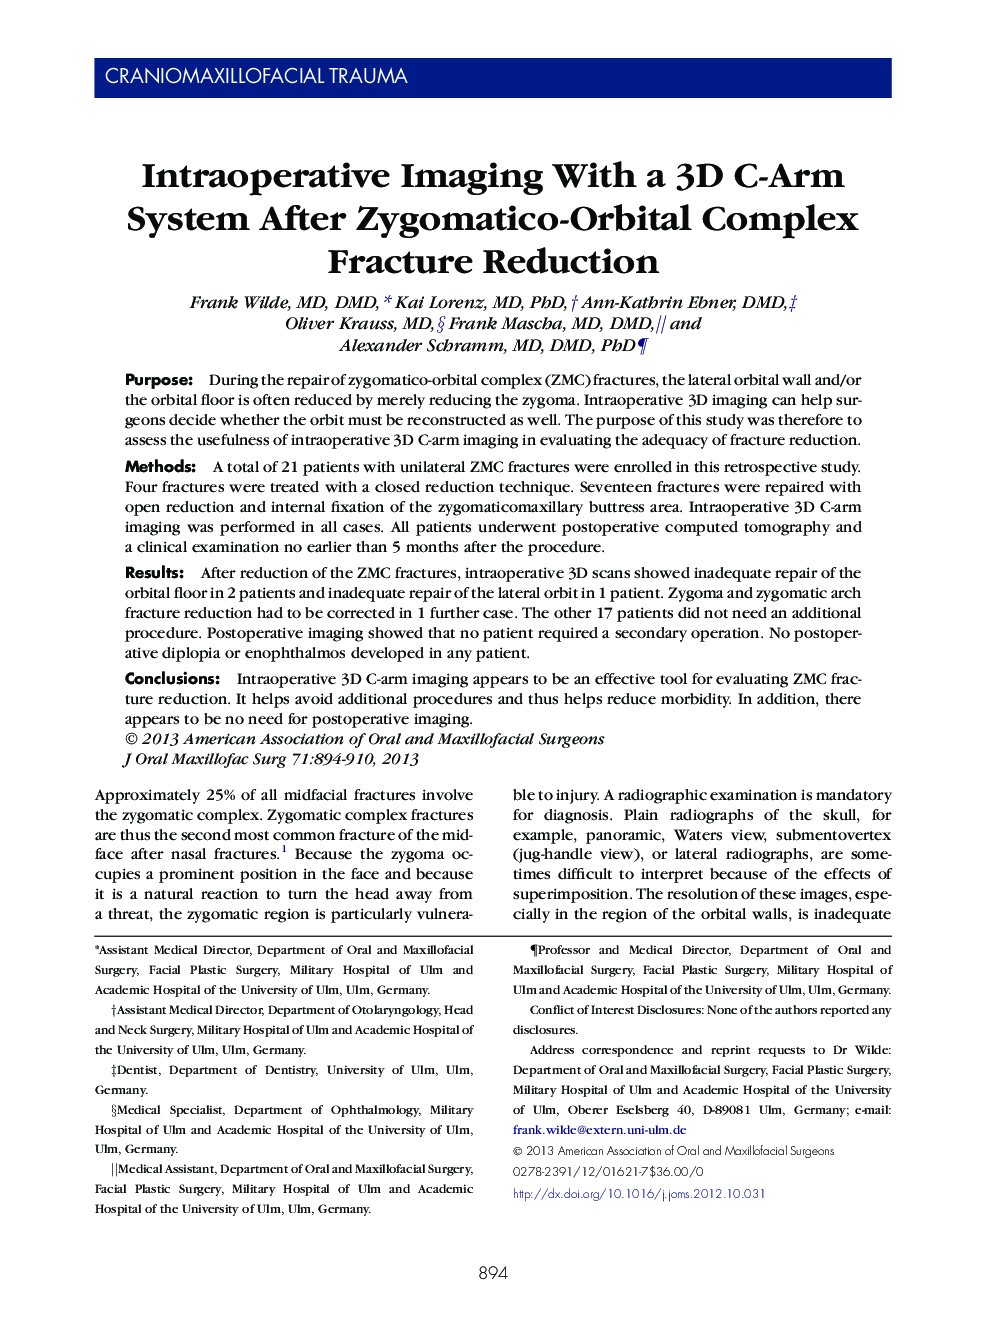 Intraoperative Imaging With a 3D C-Arm System After Zygomatico-Orbital Complex Fracture Reduction 